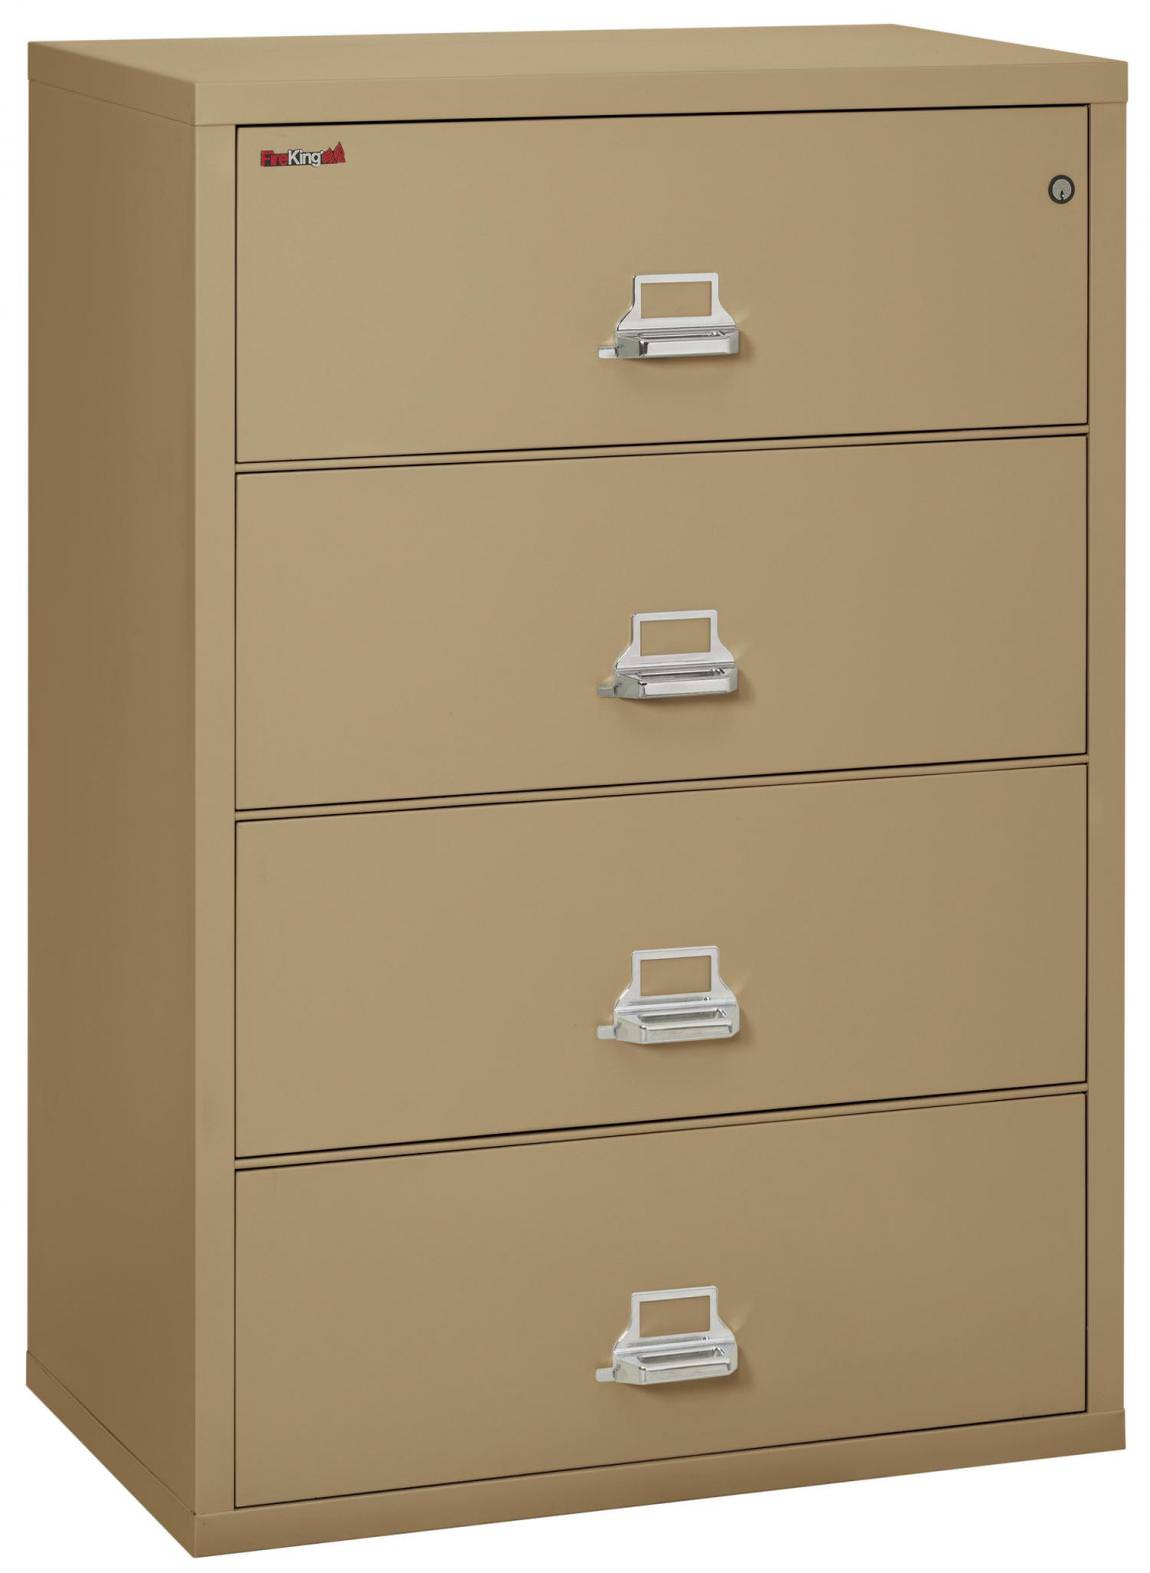 4 Drawer Fireproof Lateral File 38 Inch